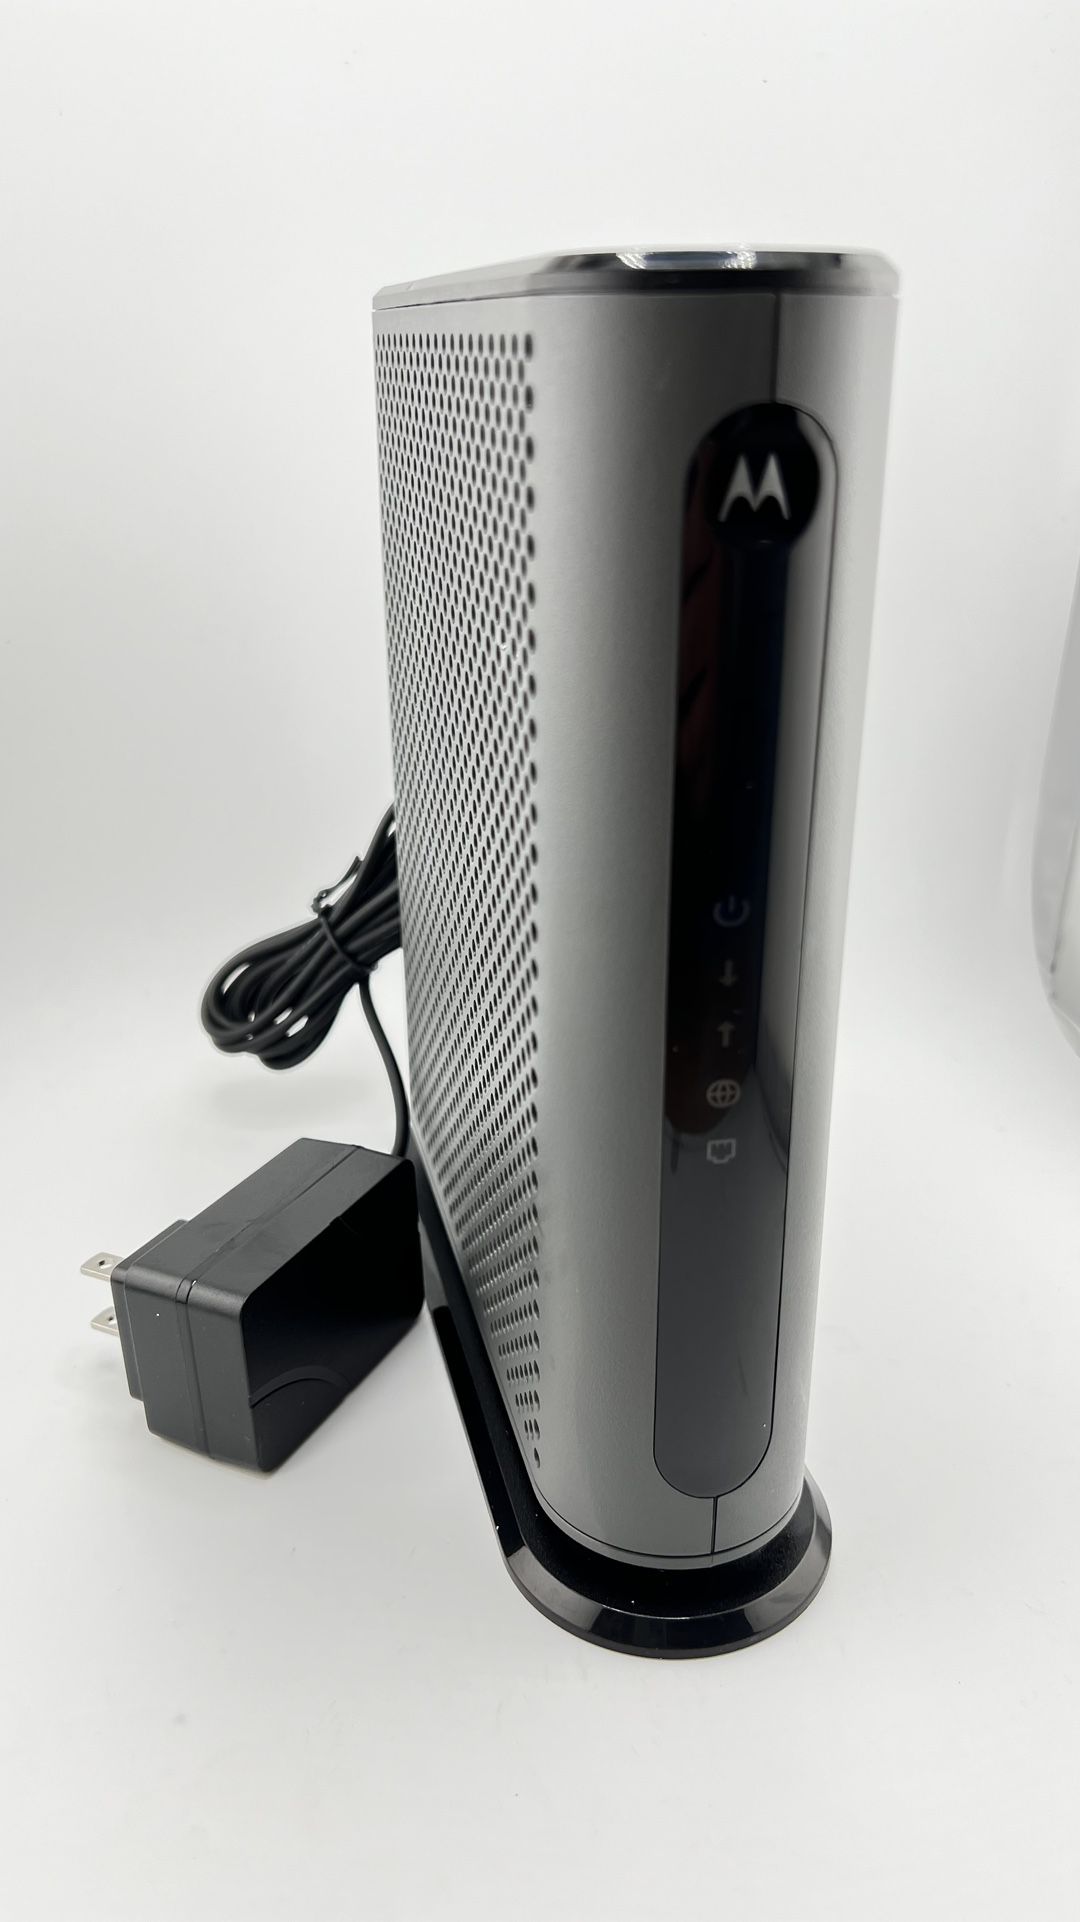 Motorola MB7621 Cable Modem DOCSIS 3.0 w/ Power Cord - TESTED WORKING